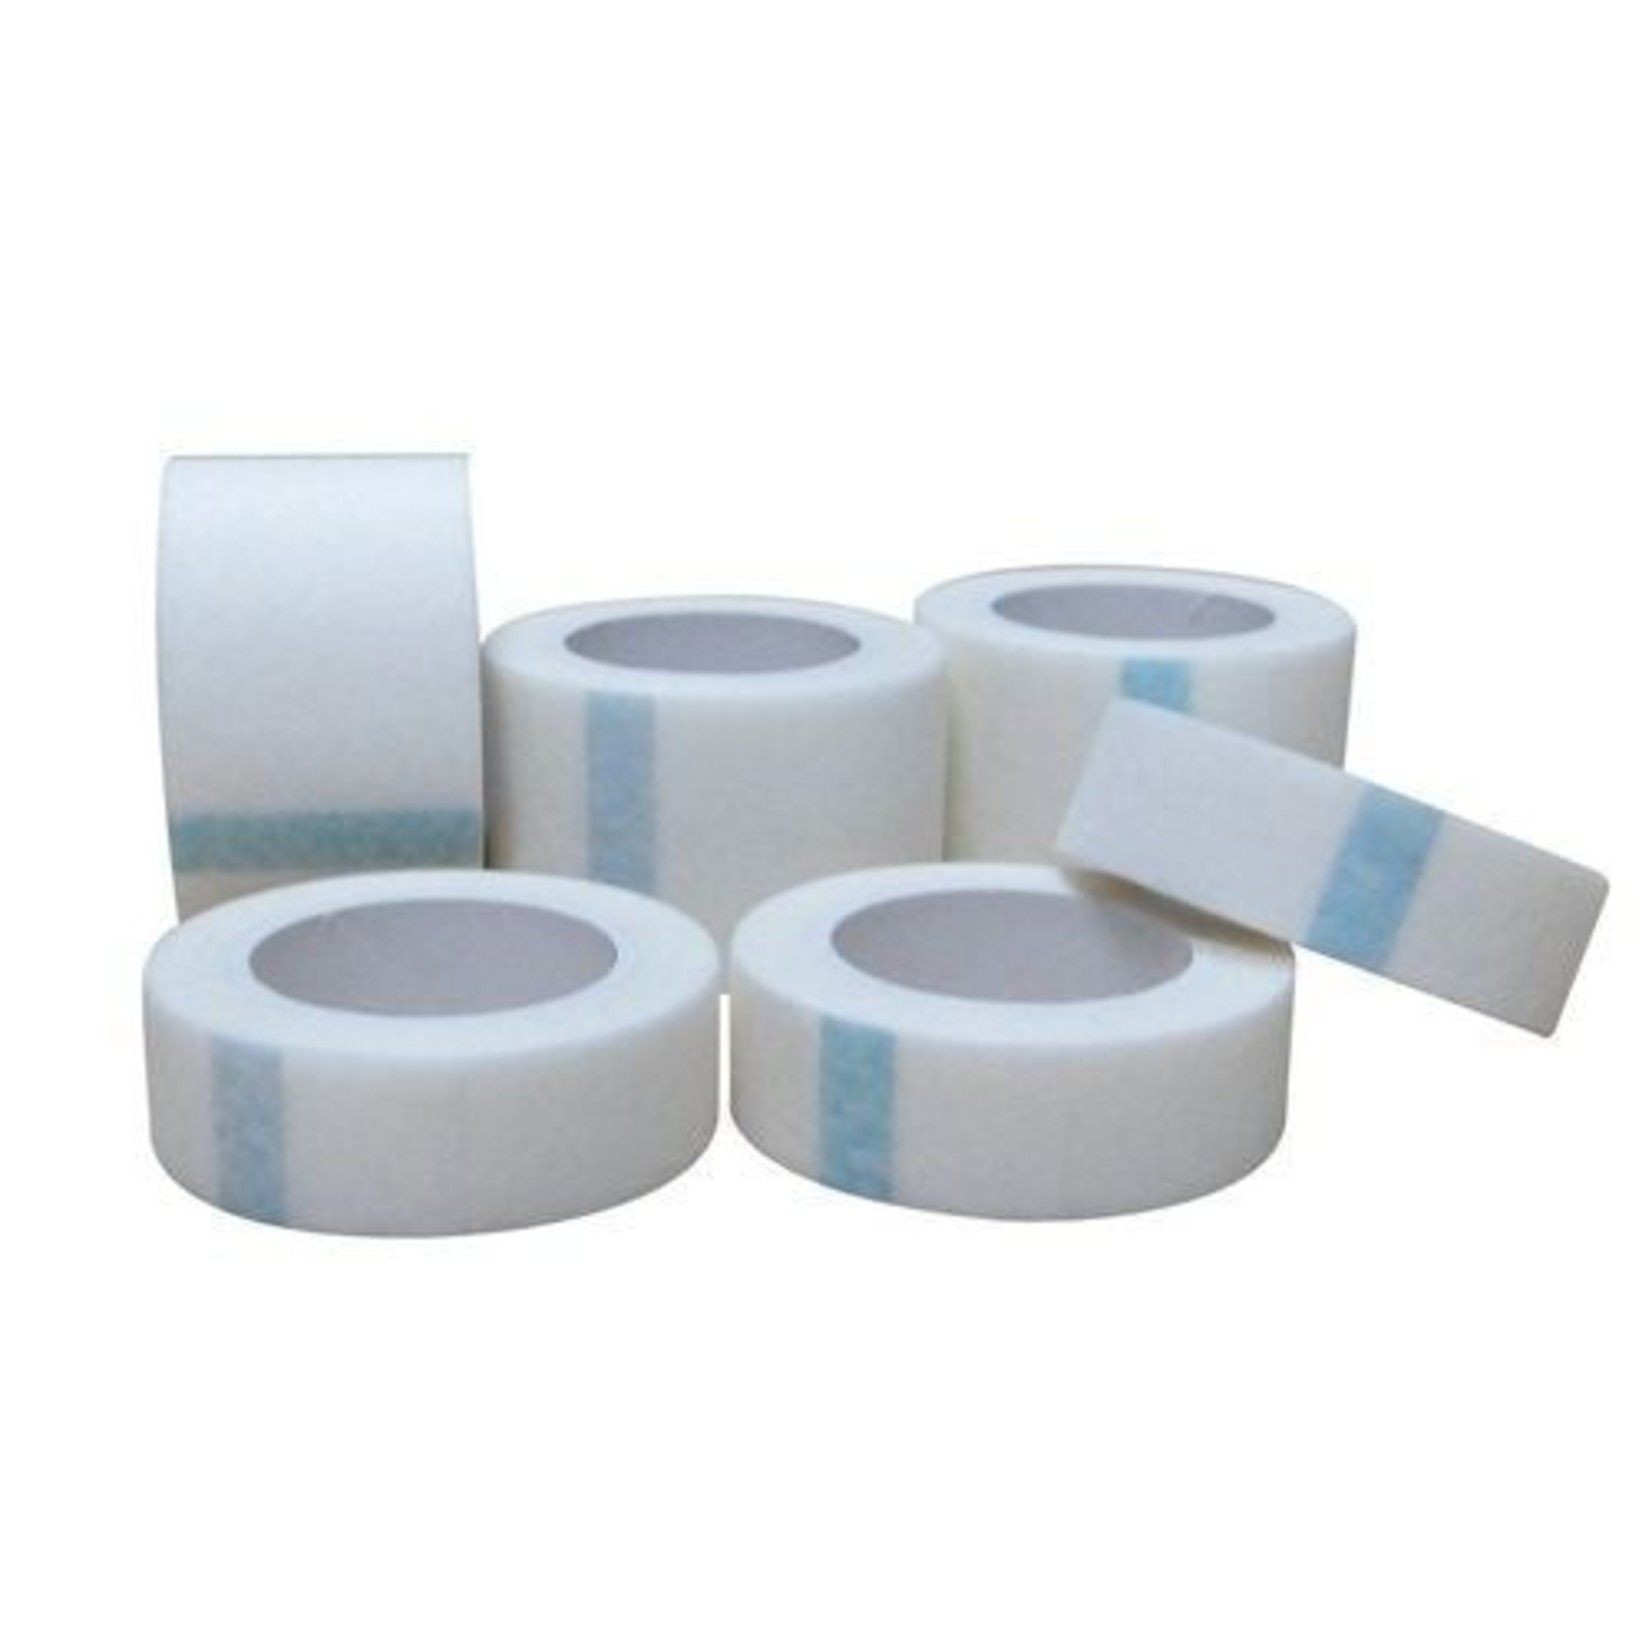 DUKAL SURGICAL PAPER TAPE - LATEX FREE (2)